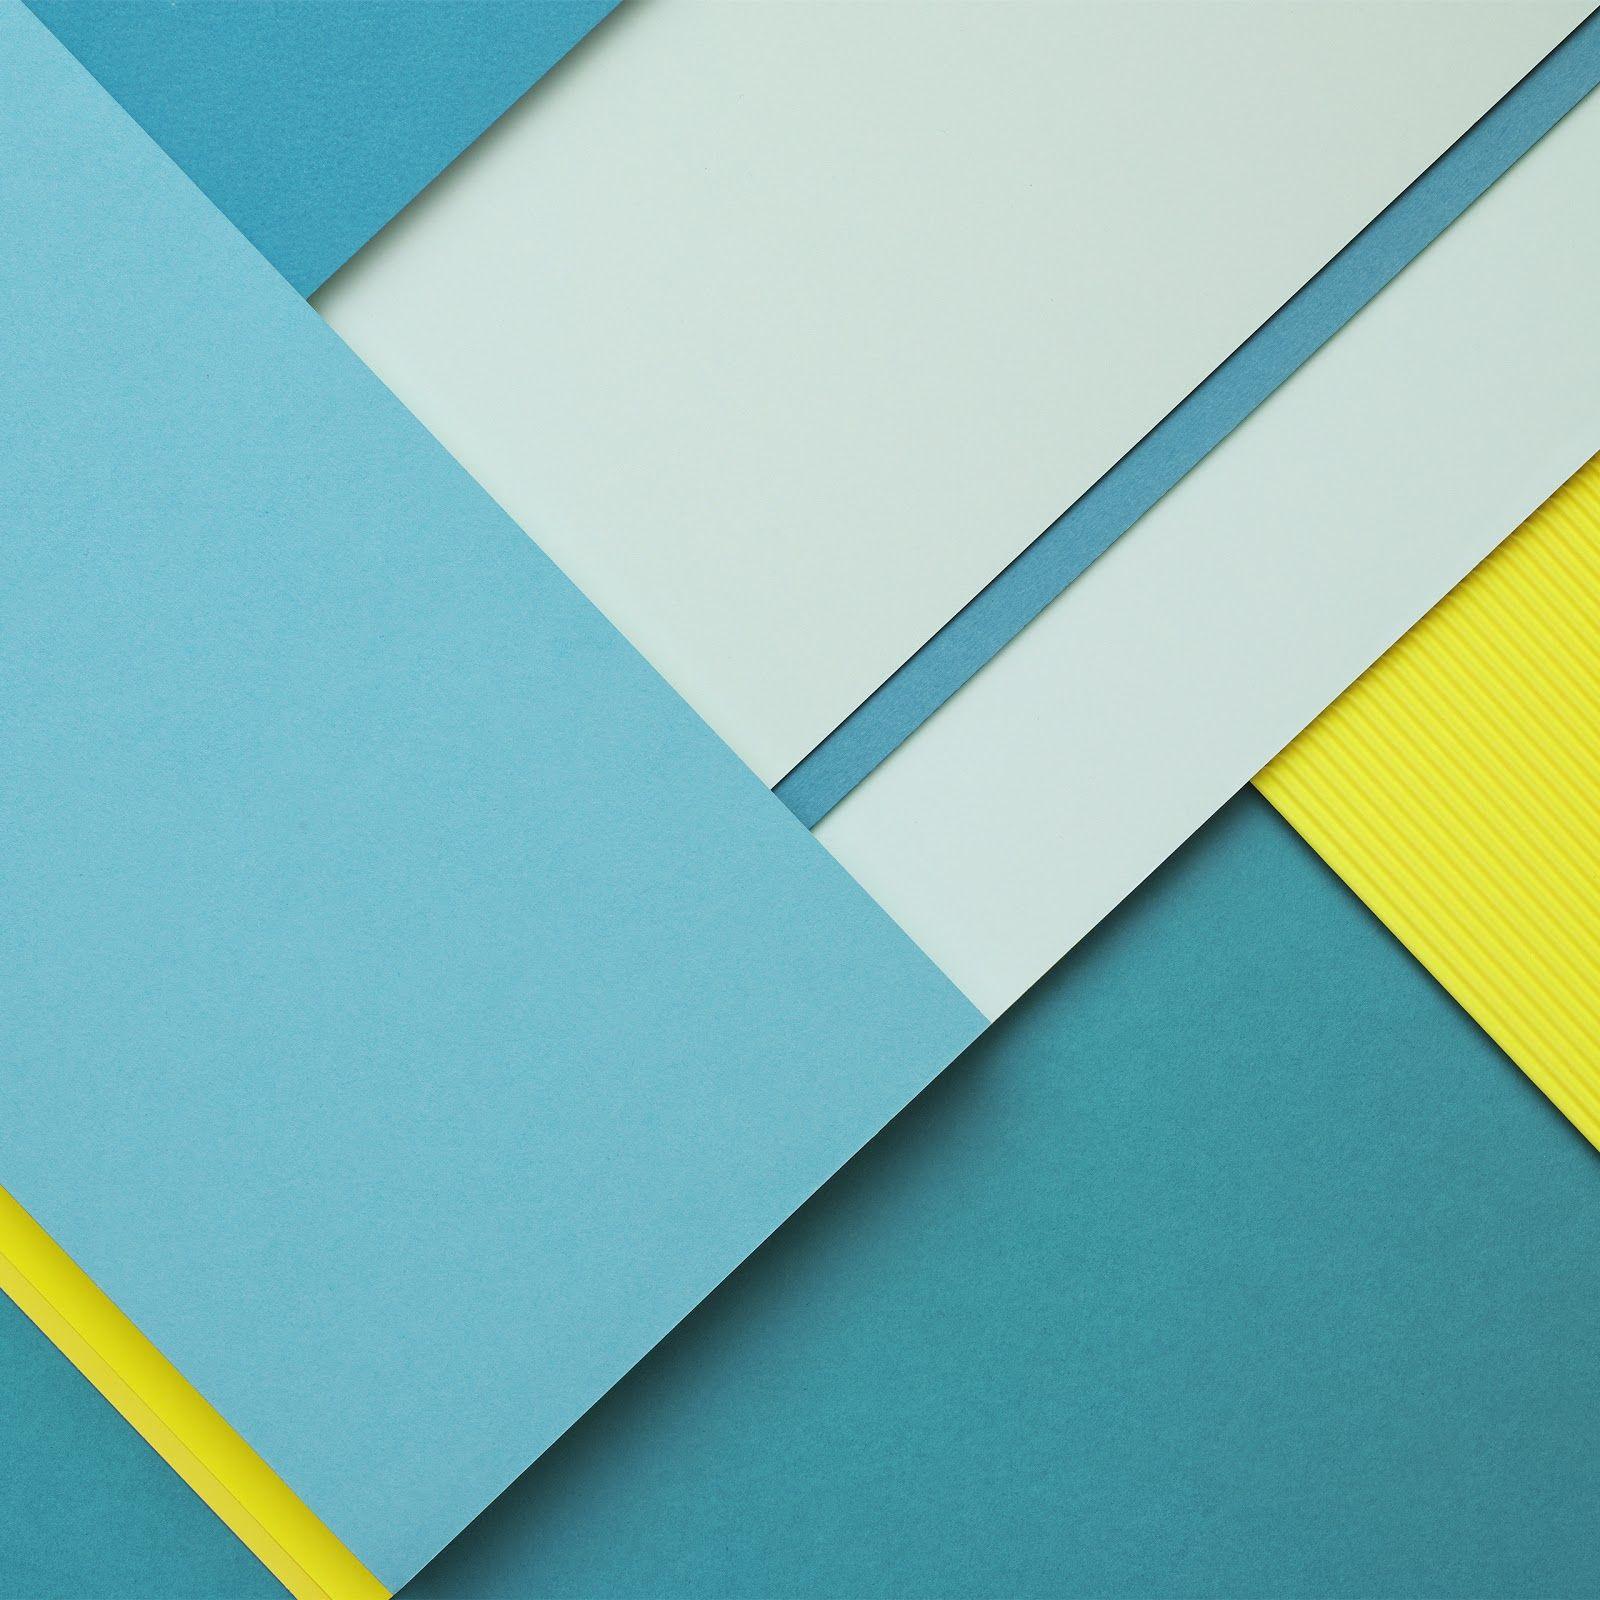 Awesome Material Design Wallpaper